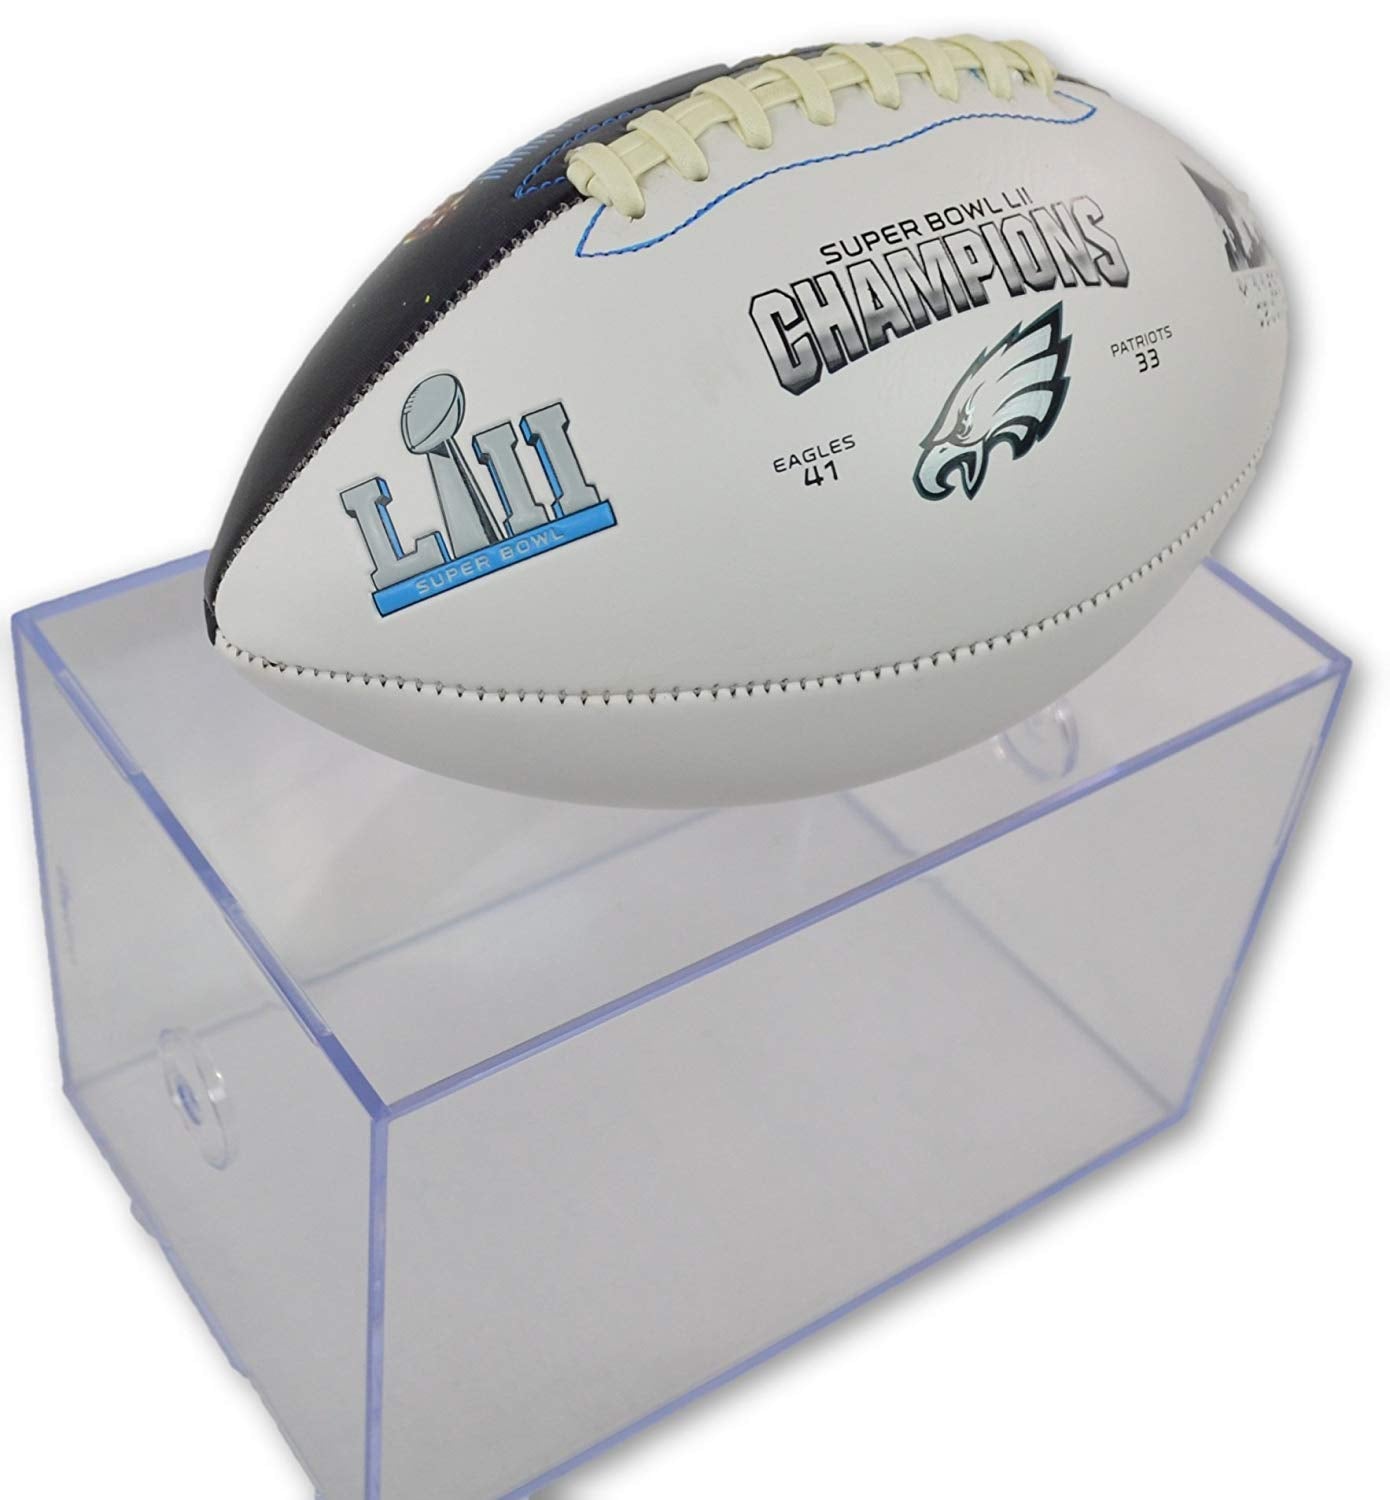 Jarden Sports Licensing/Pro-Mold Official National Football League Fan Shop Authentic NFL Signature Series Super Bowl Ball and Display Case. Great Collectible Bundle for the office or Man Cave